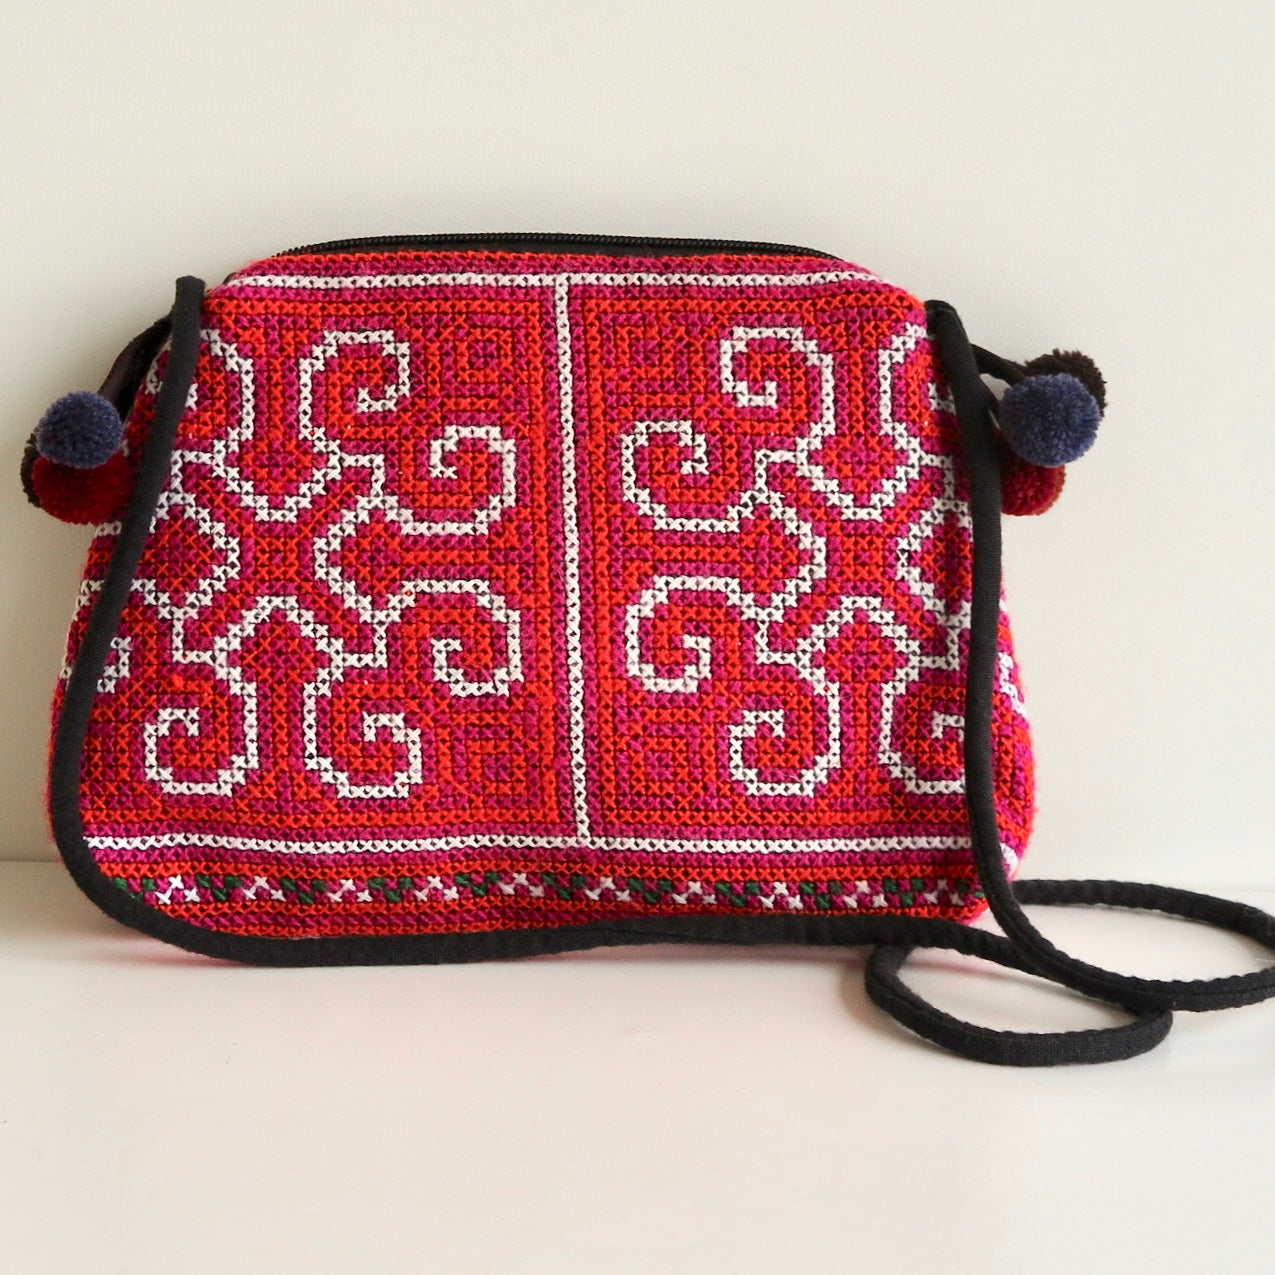 Embroidered, Cross Body Bag